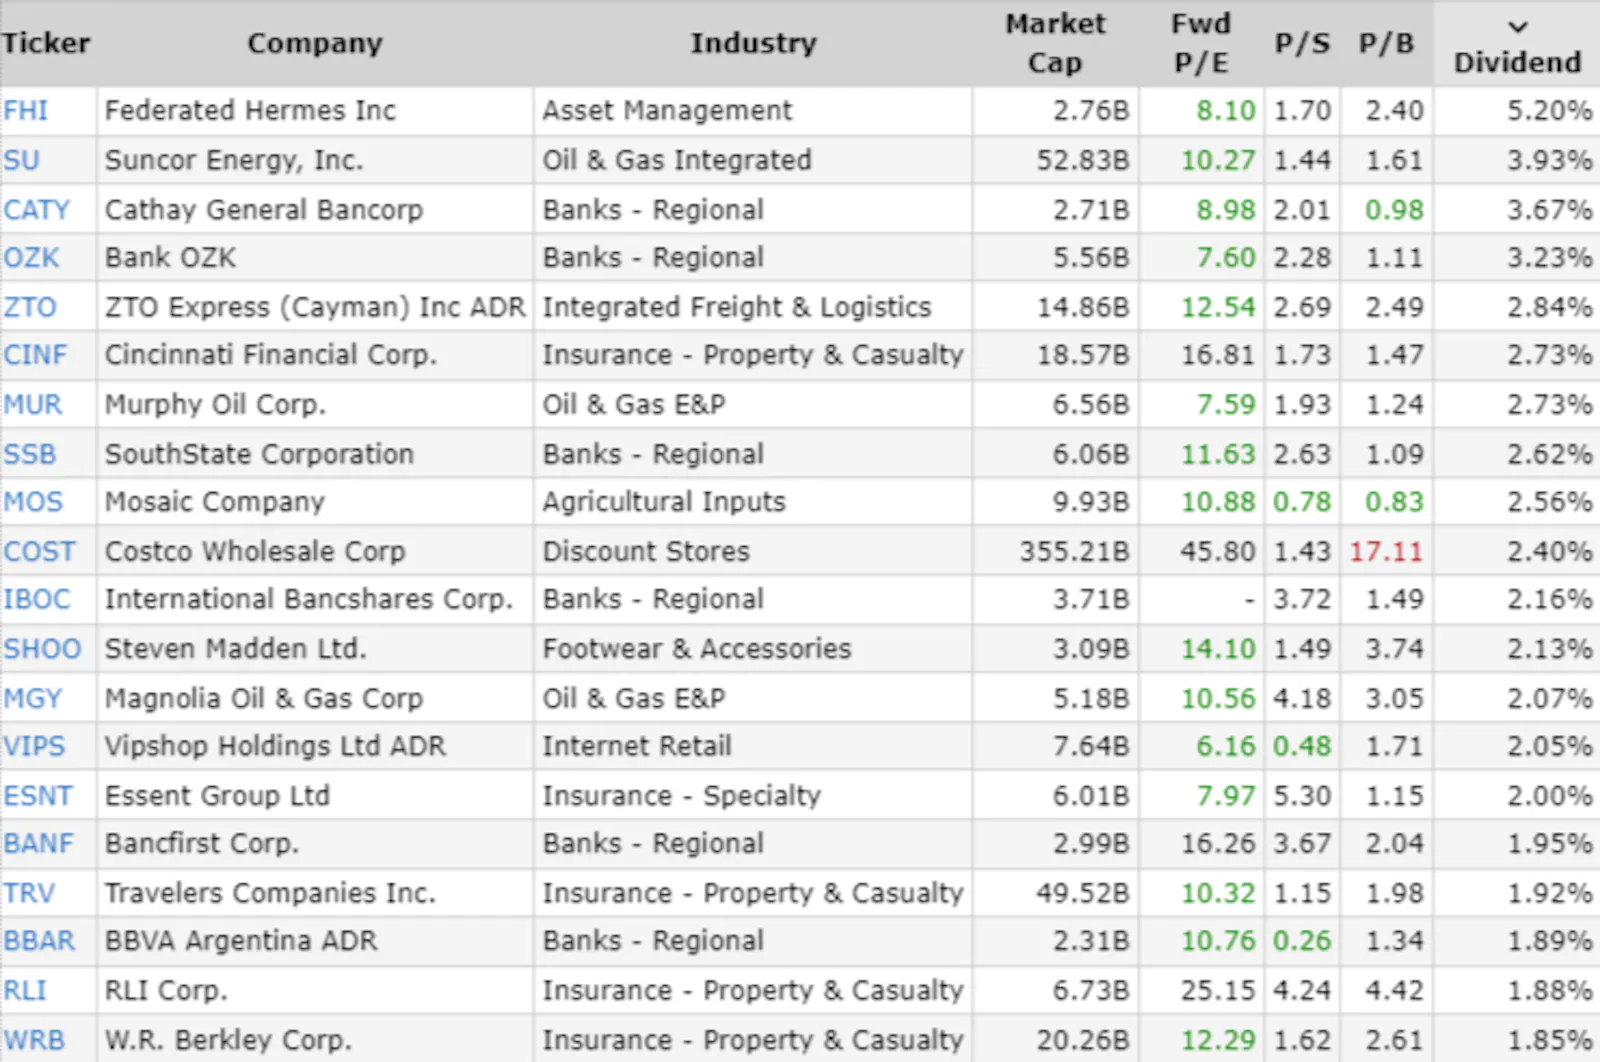 List of 20 Stocks with Dividend Growth Potential